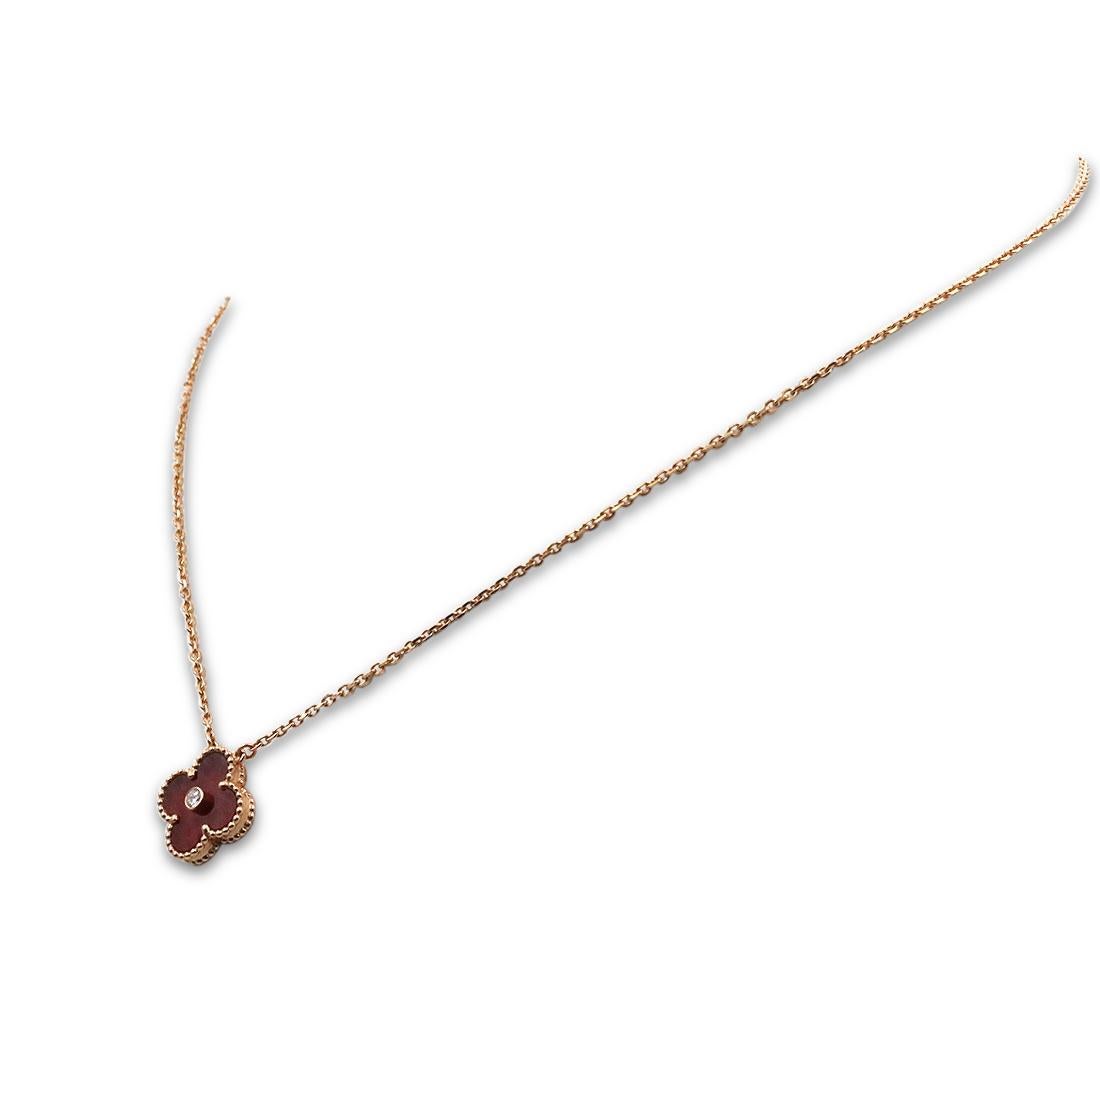 Authentic Van Cleef & Arpels limited edition 'Vintage Alhambra' pendant necklace crafted in 18 karat rose gold features a single clover-inspired motif set with carnelian and one round brilliant cut diamond with an estimated .05 total carat weight.